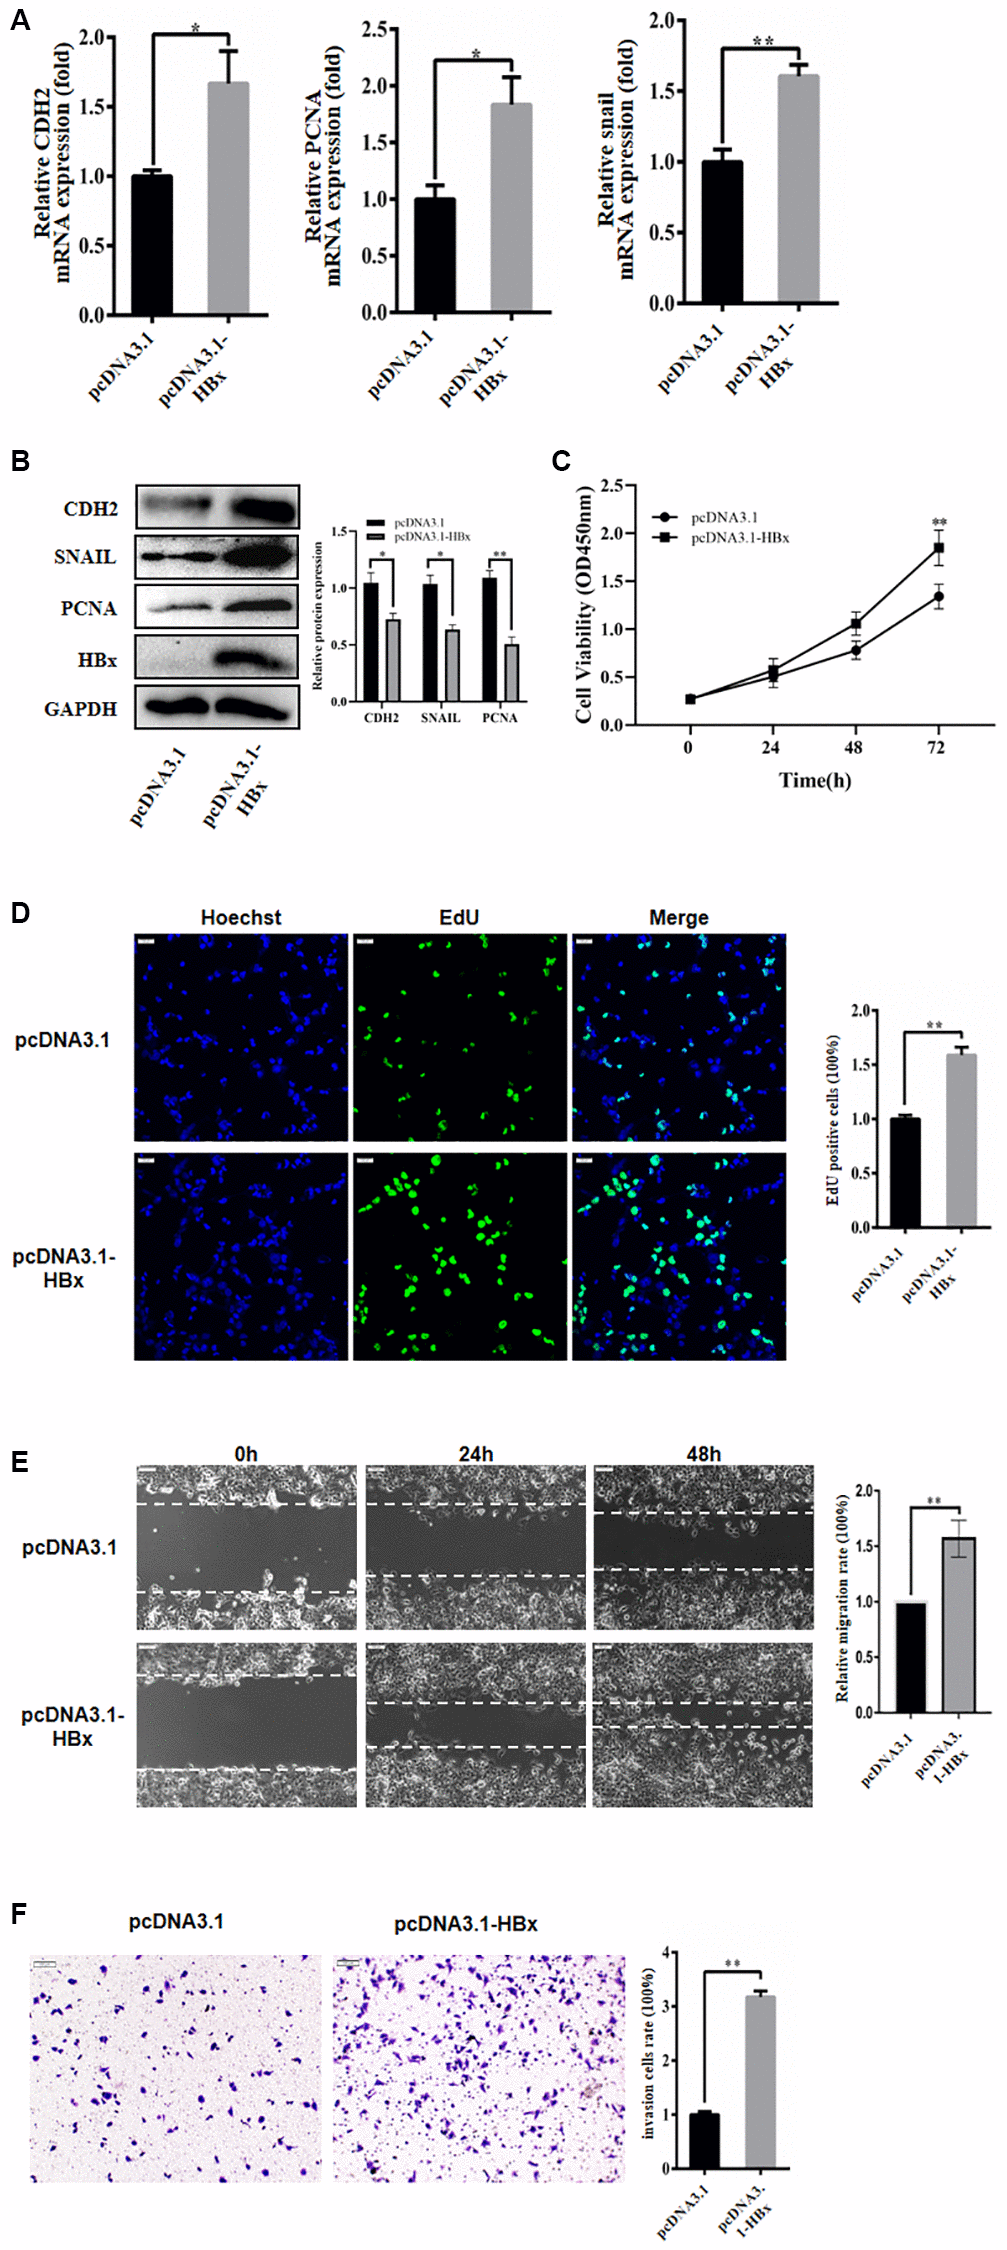 HBx promoted proliferation, migration and invasion of hepatoma cells. (A) HBx overexpression promoted the expression of PCNA, CDH2, and snail by RT-qPCR detection. (B) HBx elevated the expression of proliferative migration markers by western blotting. (C, D) EdU and CCK-8 assays confirmed the effect of HBx overexpression on the proliferation of Huh-7 cells. (E, F) HBx overexpression also promoted migration and invasion by both wound-healing assays and Transwell. The experiments were repeated at least 3 independent times. (C–F) Data was presented as mean ± SD from three independent experiments. *p **p 